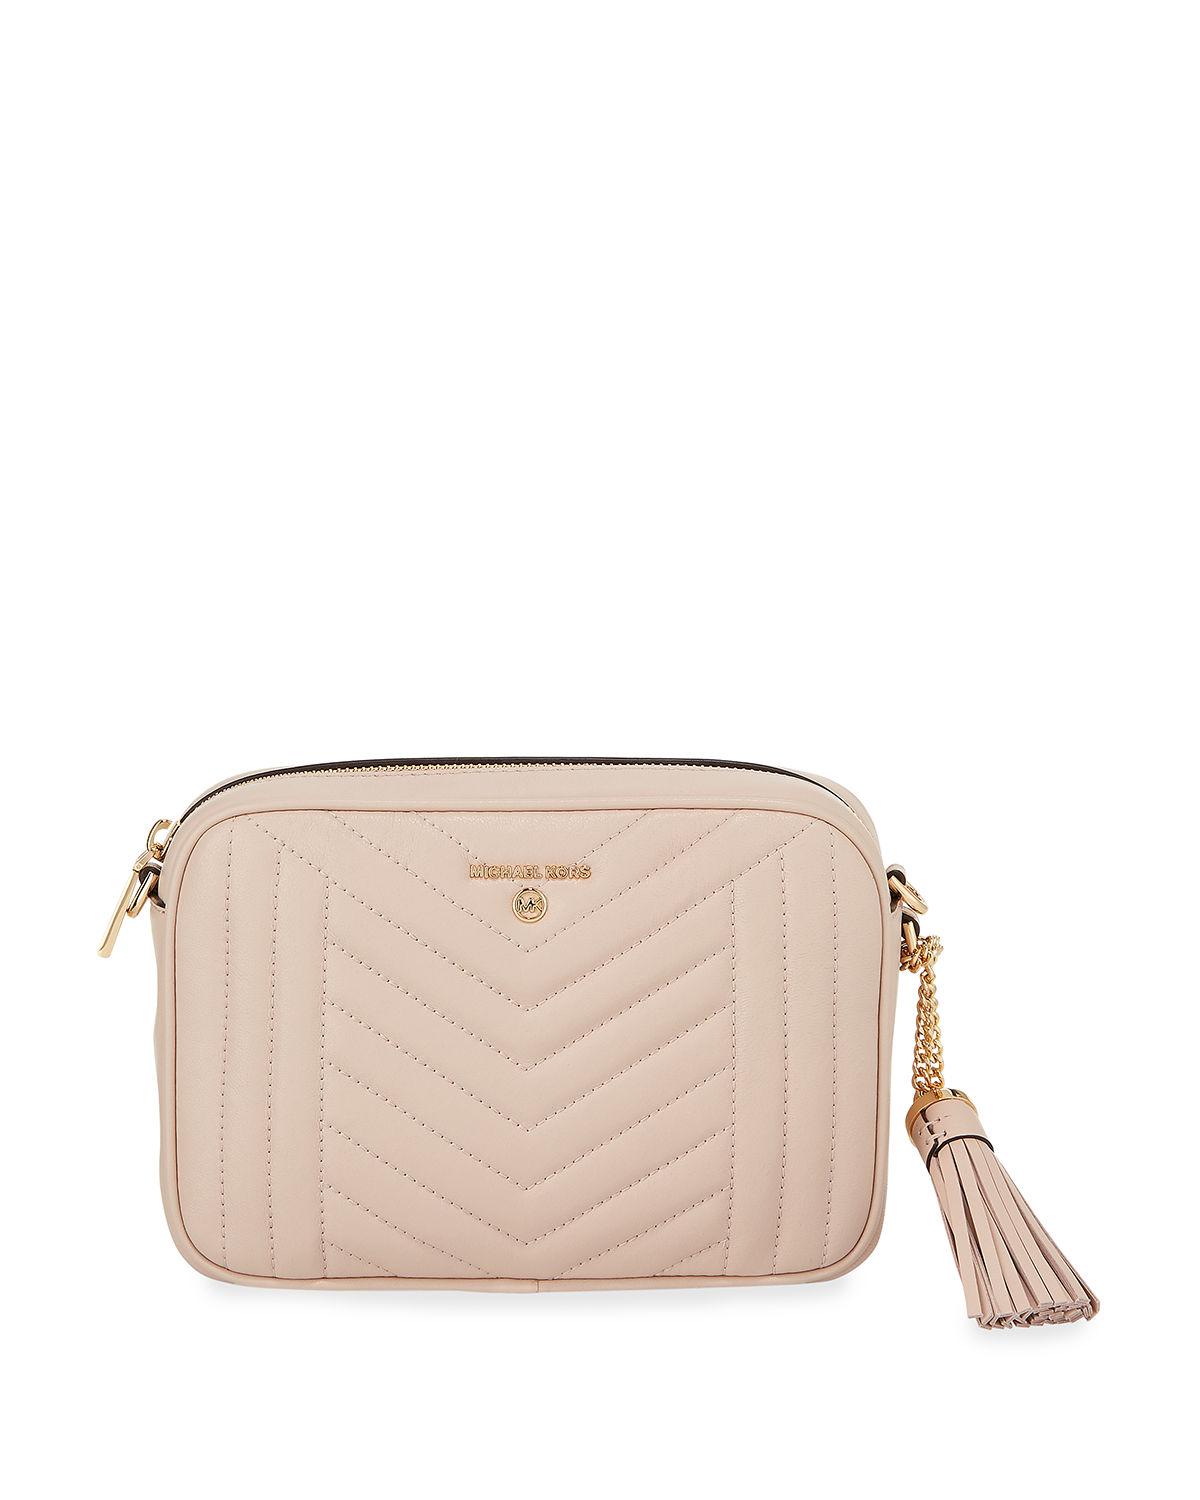 MICHAEL Michael Kors Jet Set Medium Quilted Leather Camera Bag in Light Pink (Pink) - Lyst